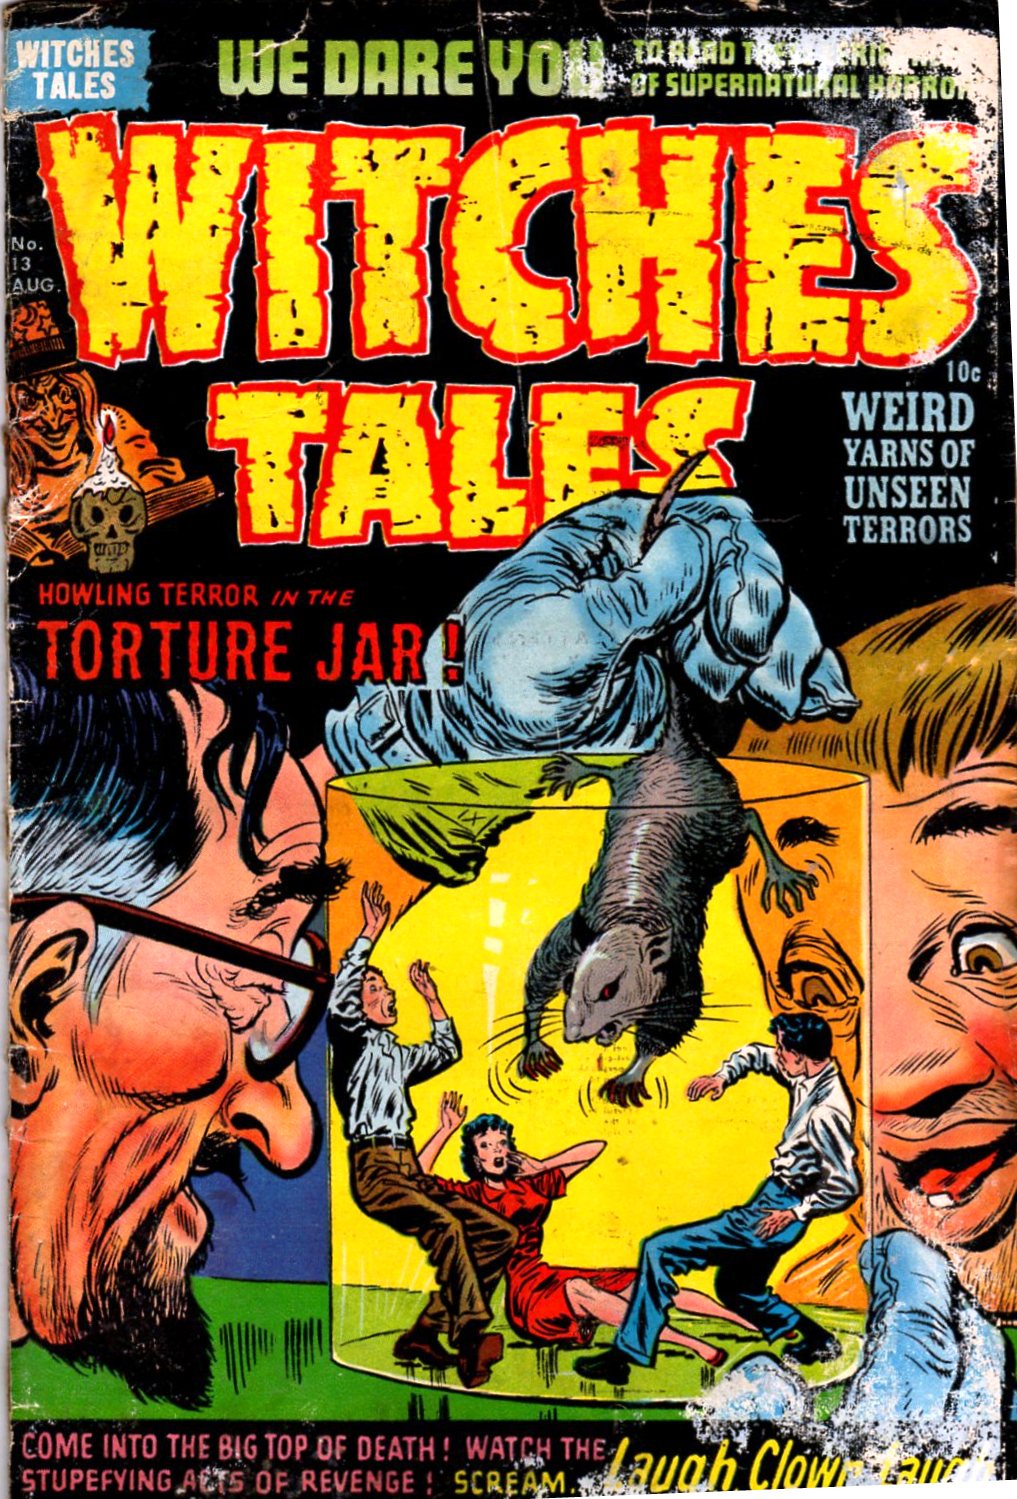 Witches Tales Vol 1 13 | Harvey Comics Database Wiki | Fandom